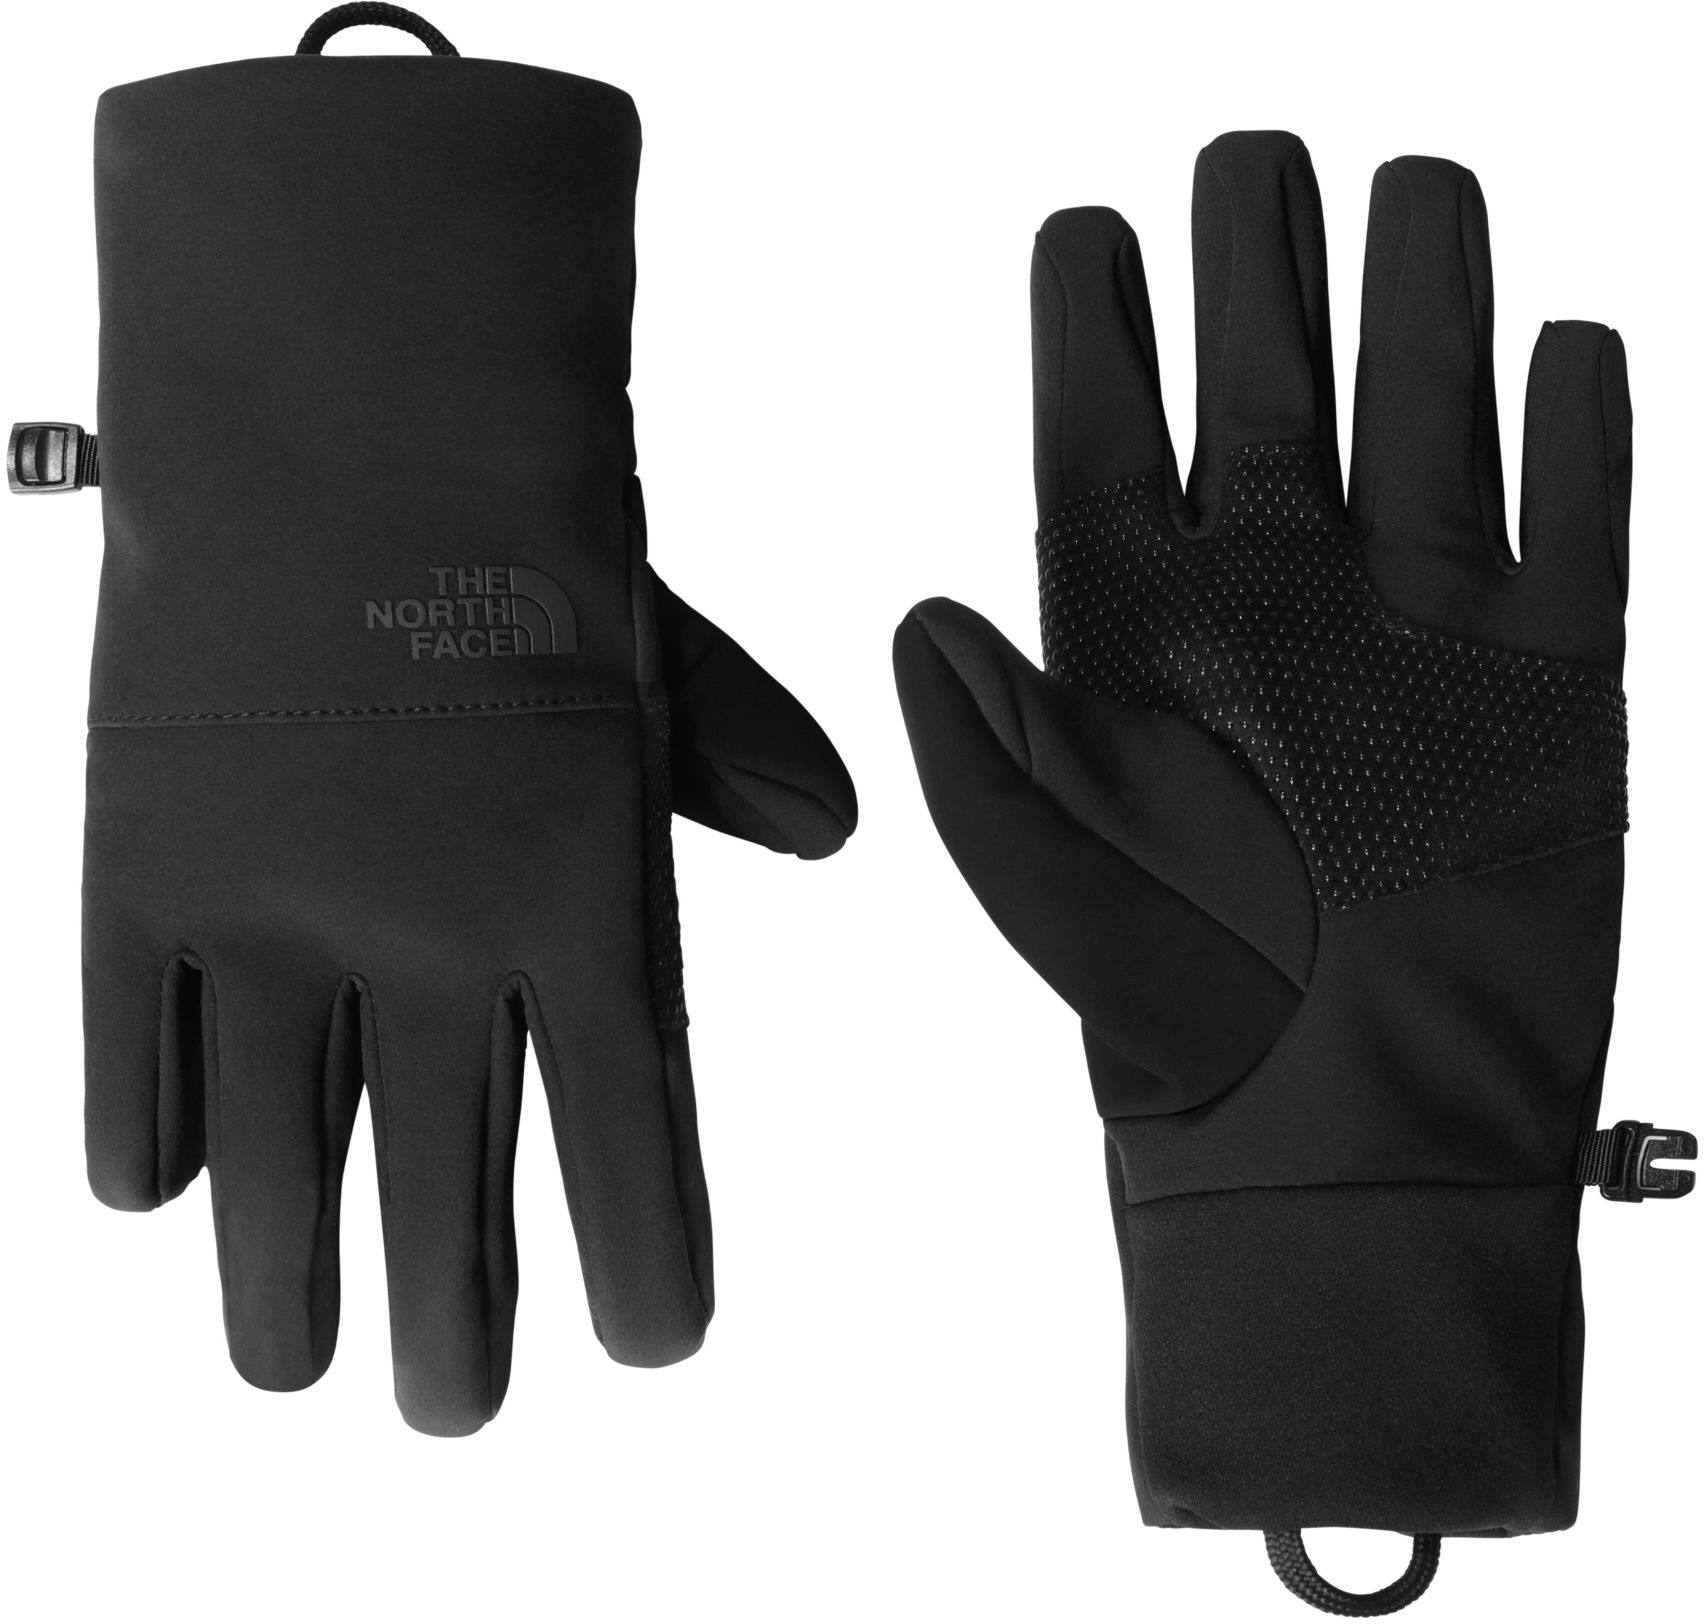 The North Face Women’s Apex Etip Insulated Gloves